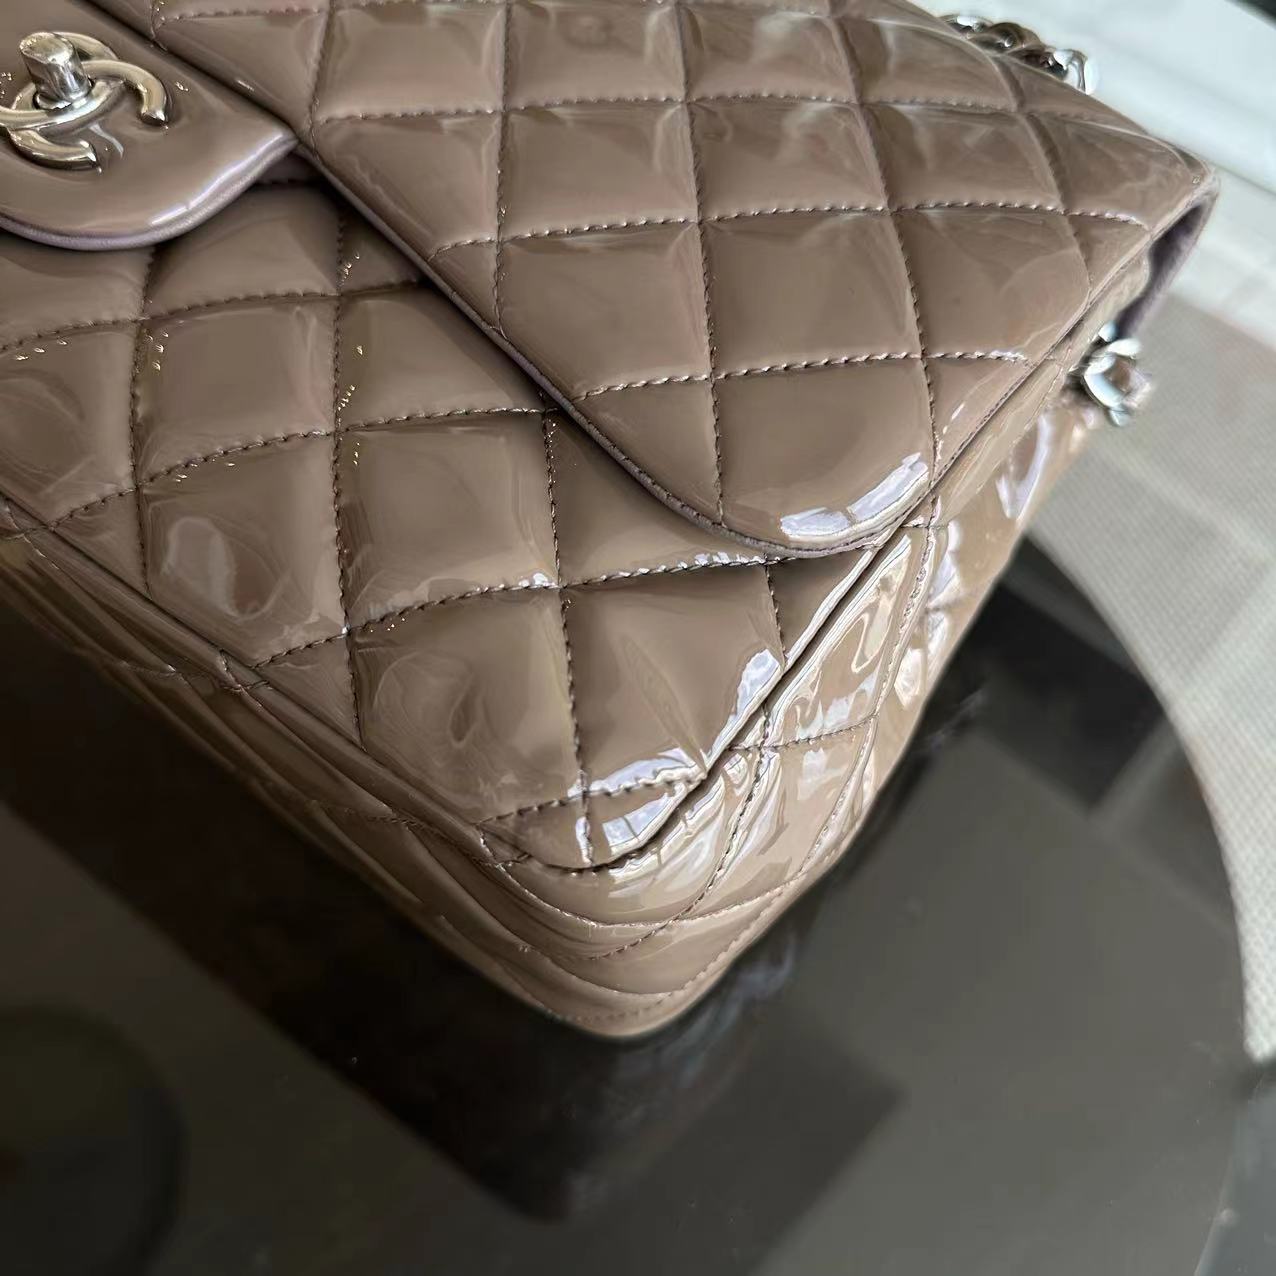 Chanel Jumbo Classic Flap Quilted Patent Calfskin Leather Brown SHW No 15